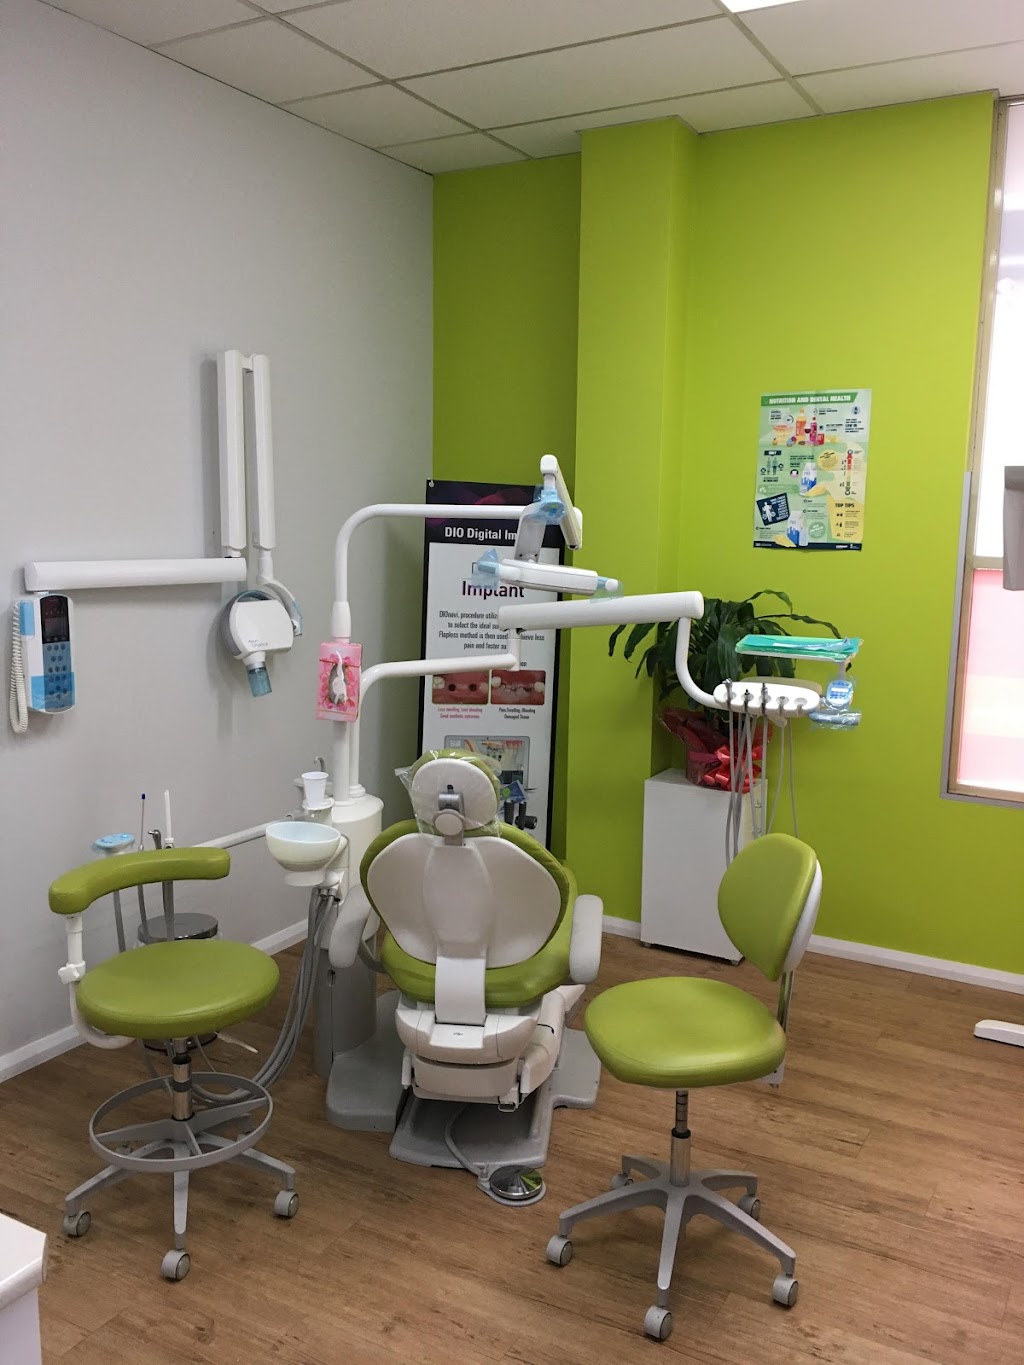 Advance Dental Canley Heights | health | 136 Torrens St, Canley Heights NSW 2166, Australia | 0297238788 OR +61 2 9723 8788